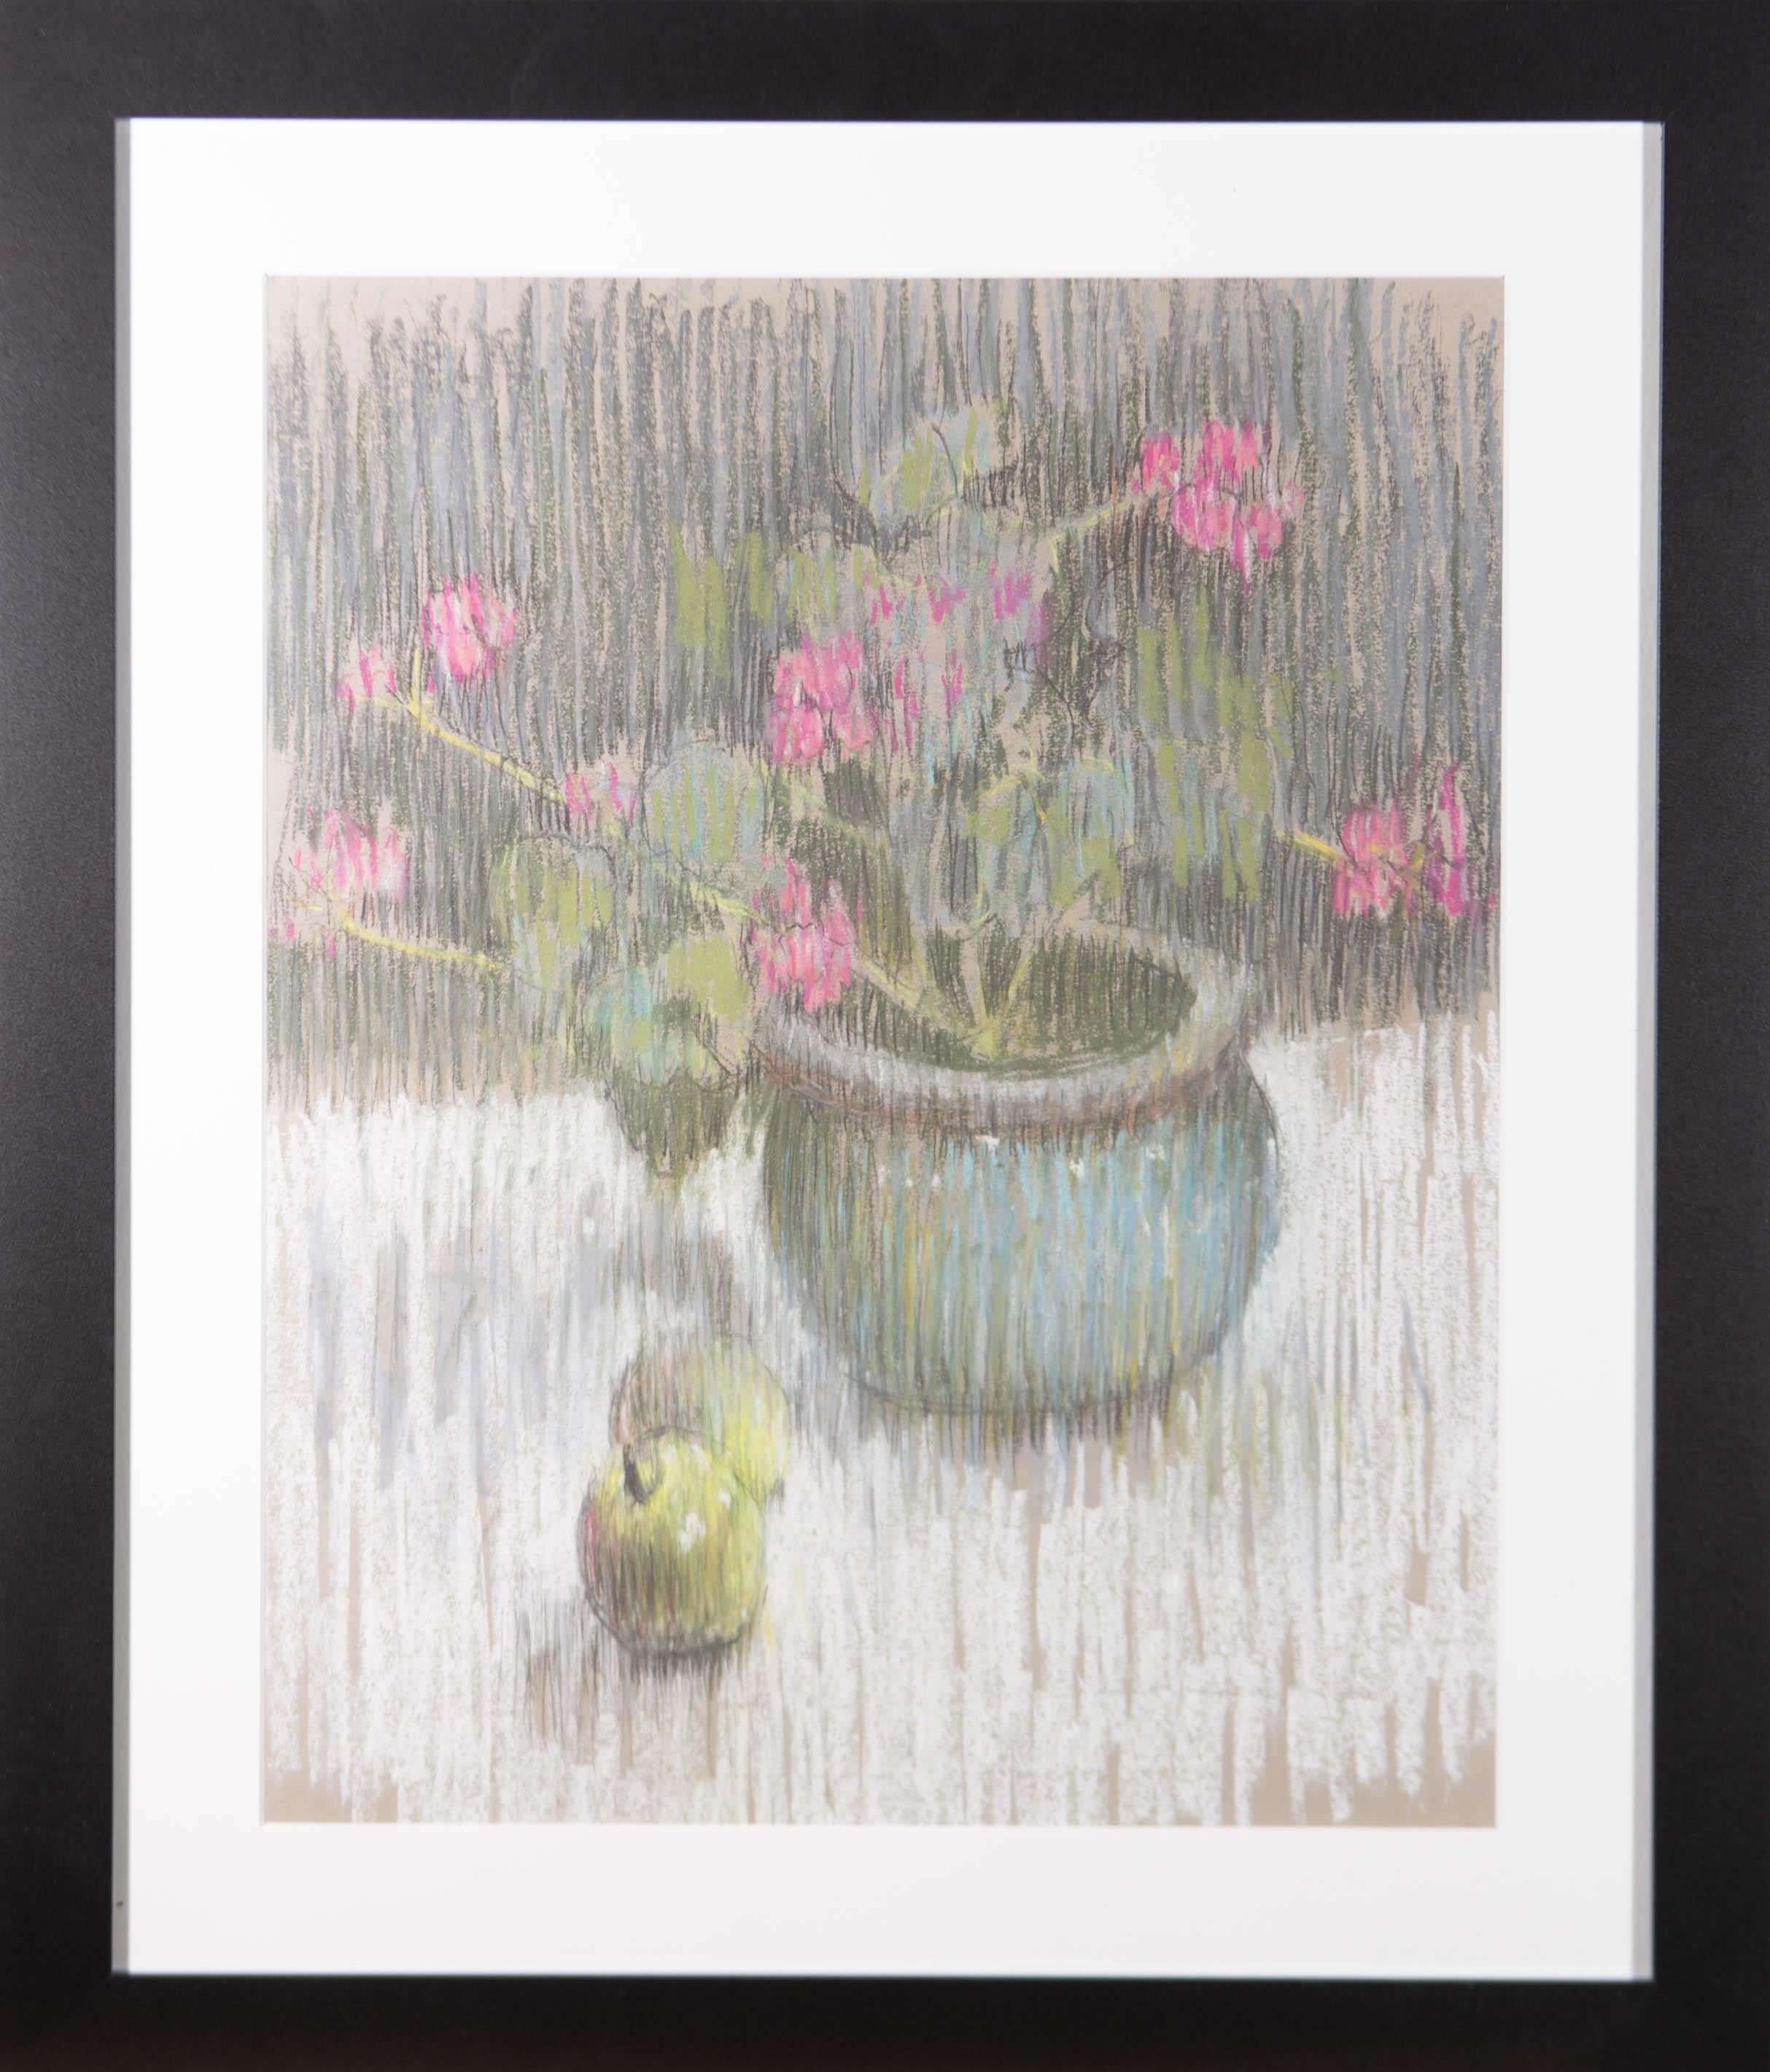 Val Hamer - Contemporary Pastel, Flower Pot and Green Apples